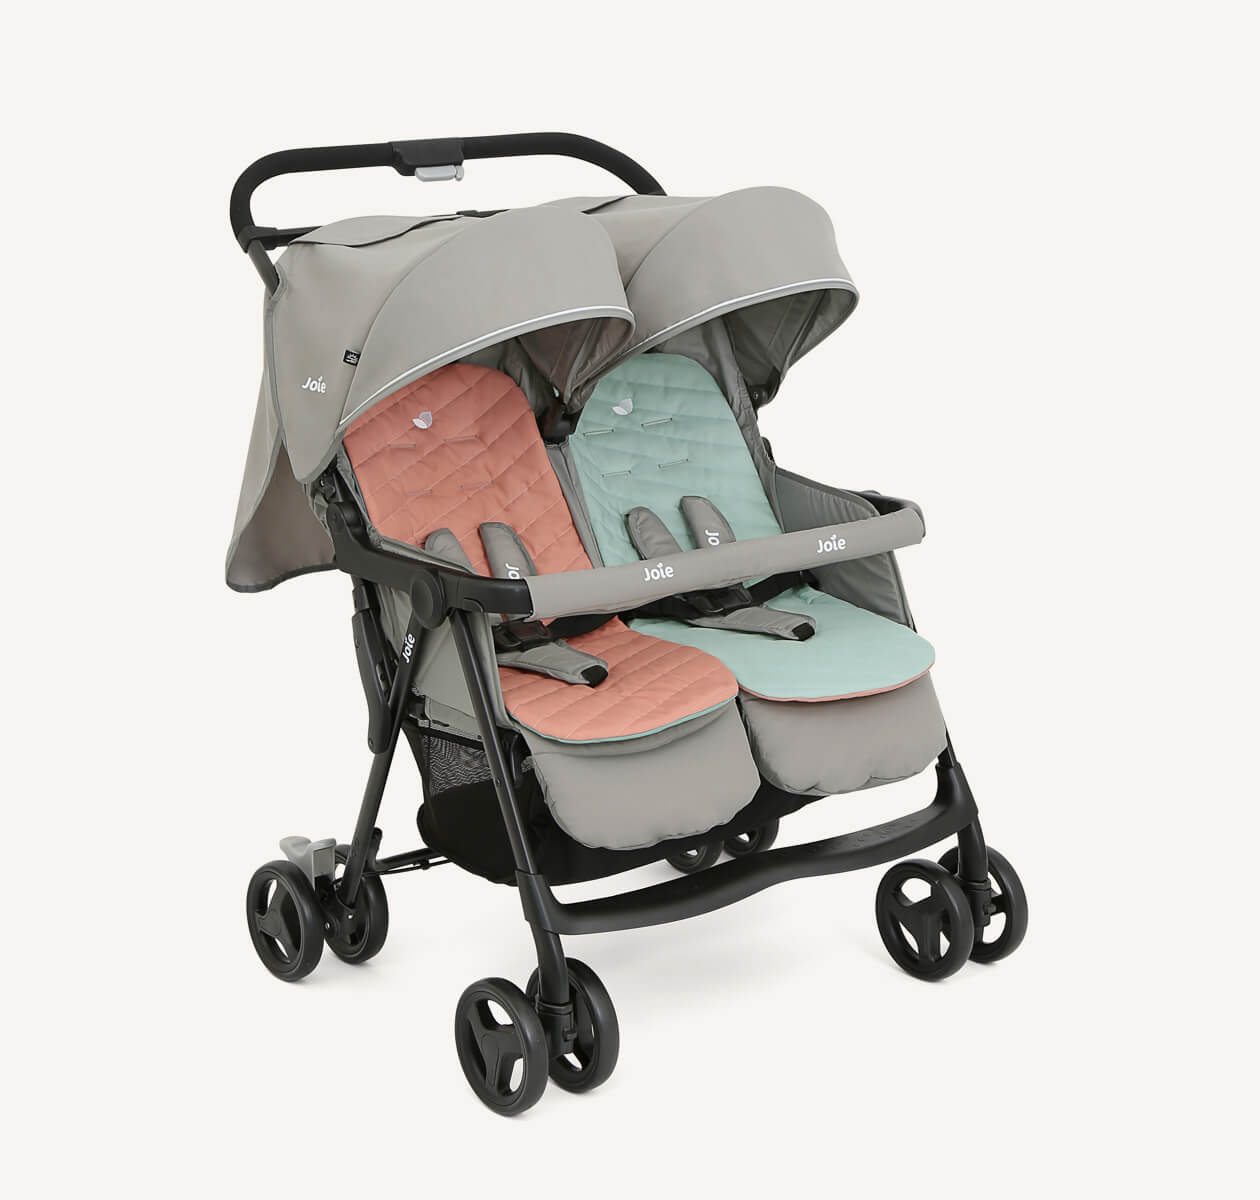  The Joie Aire Twin side-by-side double stroller in light gray at an angle, with a peach coloured seat insert on the left seat and a light blue insert on the right seat.